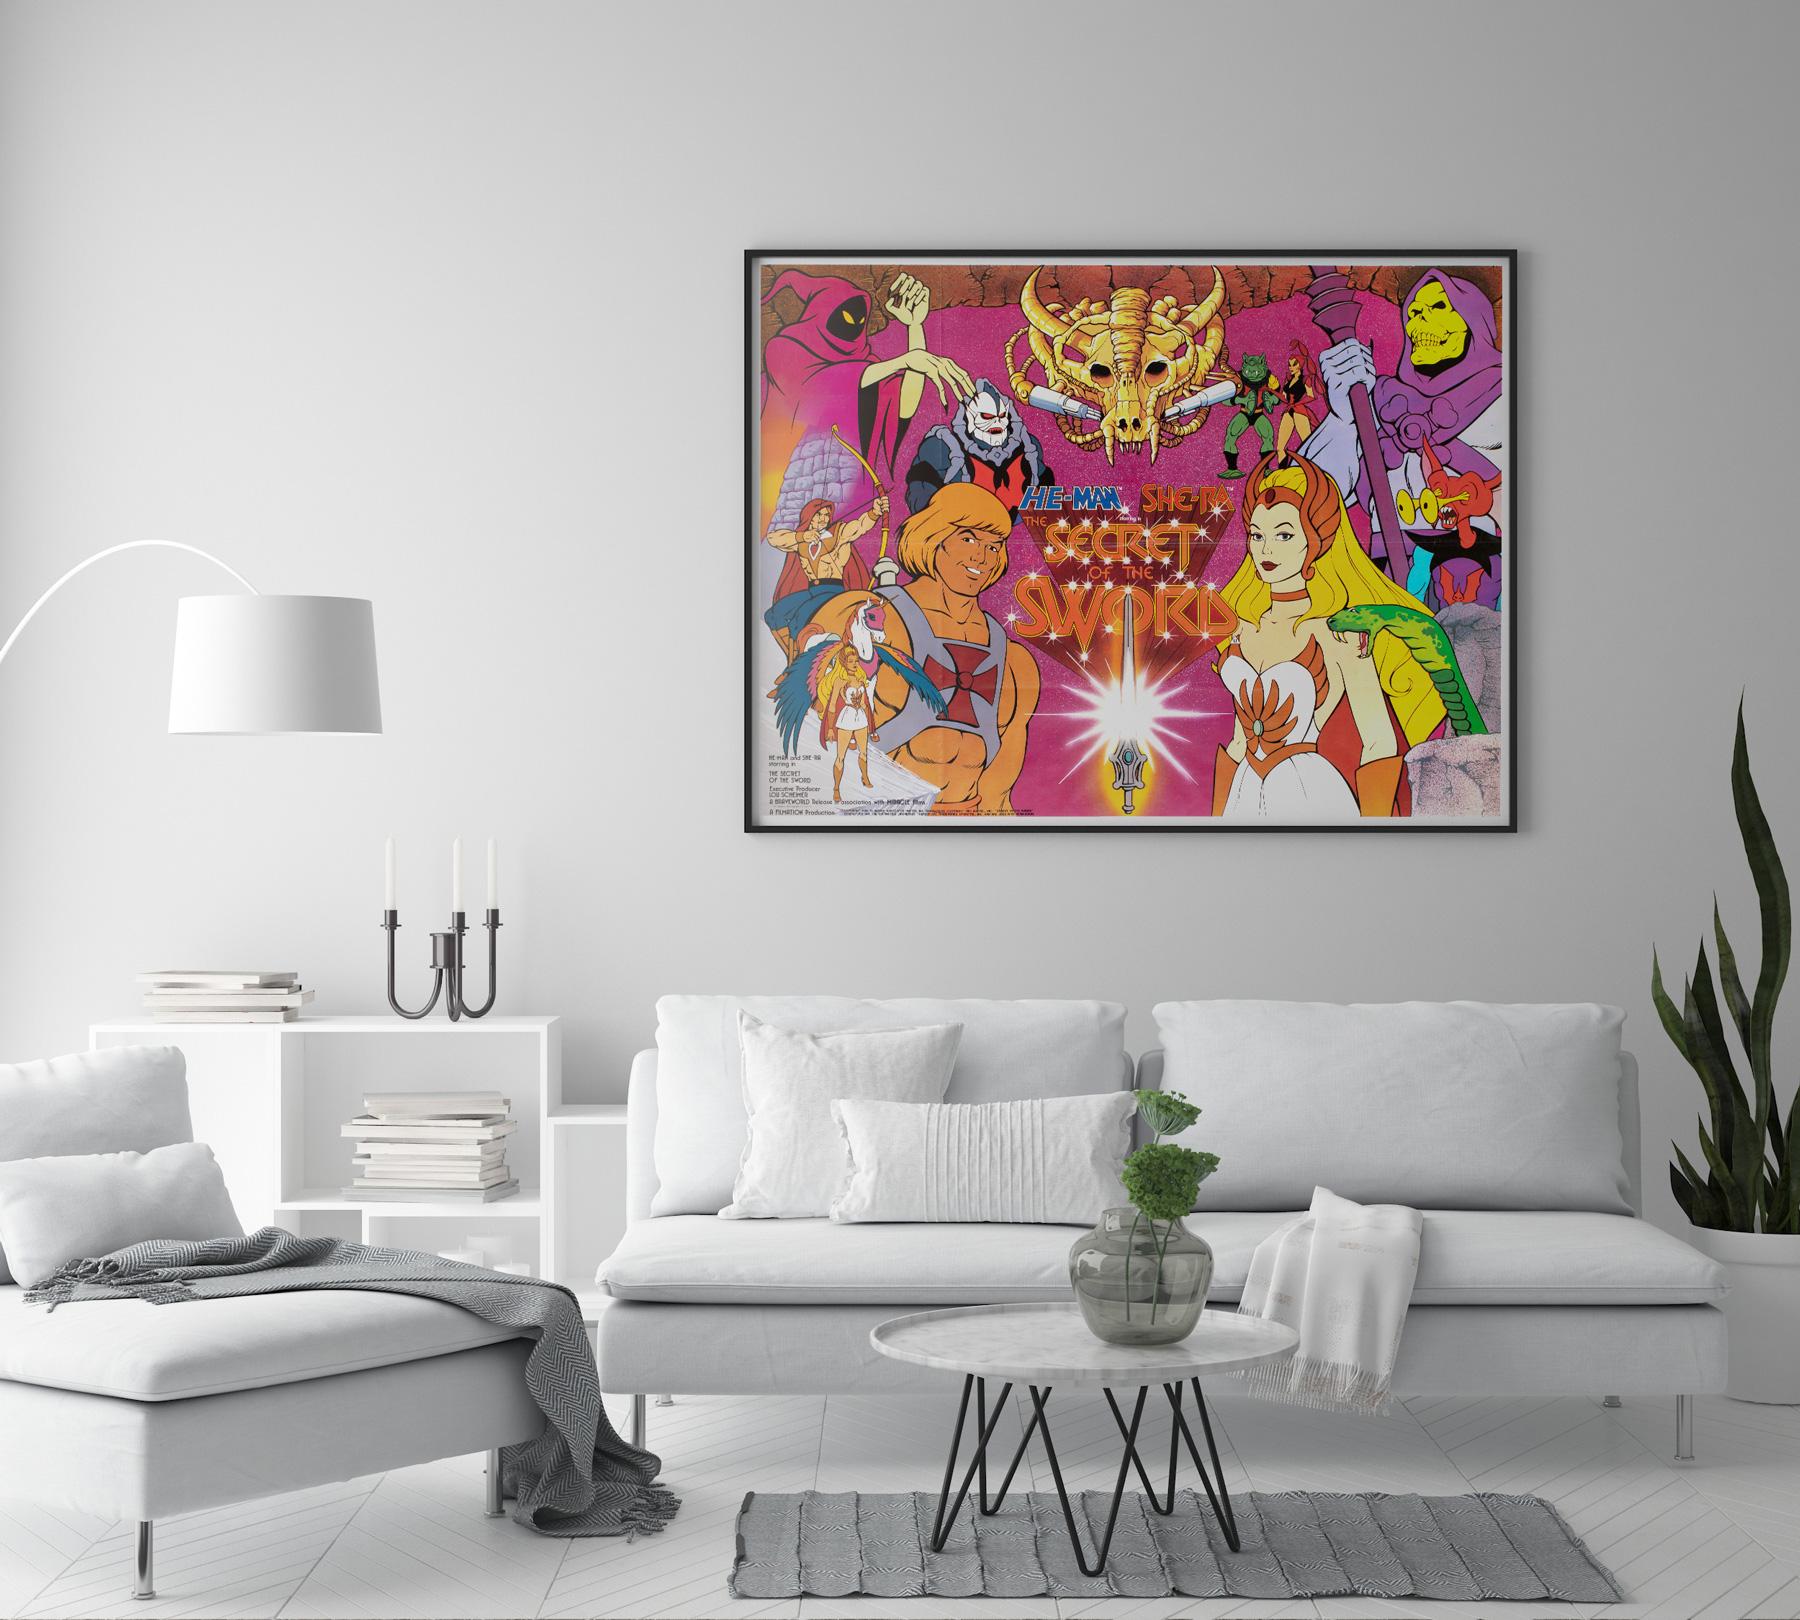 By the power of Grayskulf this poster has the power to delight and amaze! This original British film poster for He-Man and She-Ra's The Secret of the Sword is a wonderfully nostalgic piece.

This vintage movie poster is sized 30 x 39 3/4 inches